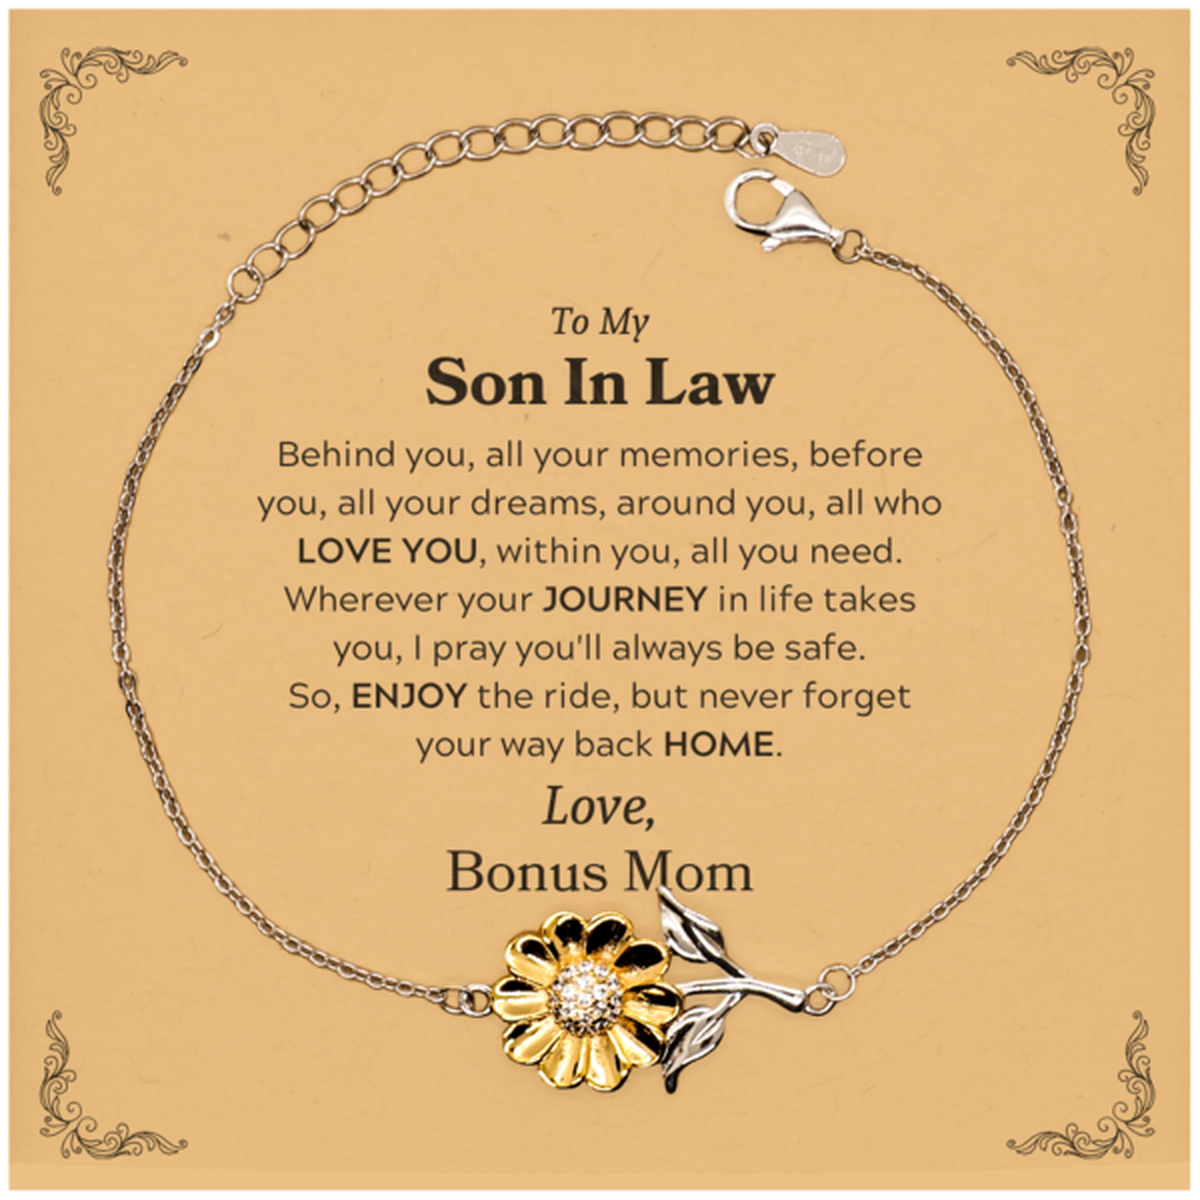 To My Son In Law Graduation Gifts from Bonus Mom, Son In Law Sunflower Bracelet Christmas Birthday Gifts for Son In Law Behind you, all your memories, before you, all your dreams. Love, Bonus Mom